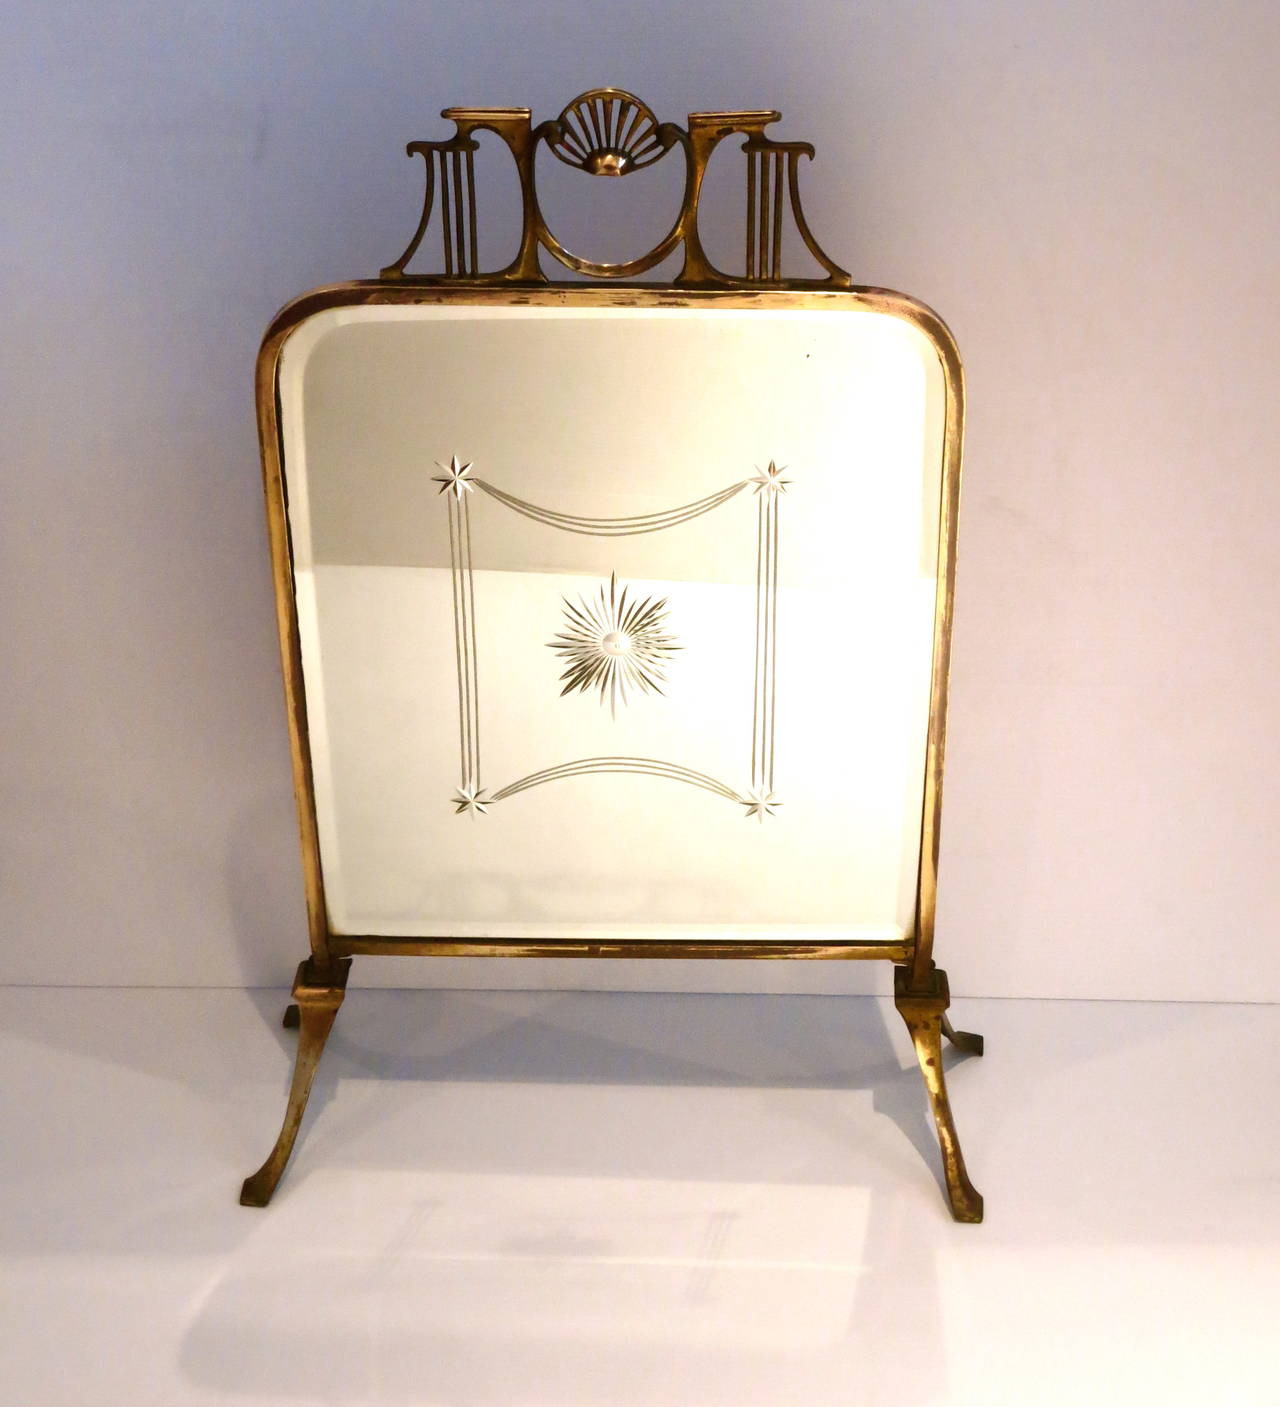 A beautiful aged brass free standing fire screen, the antique silver plated mirror with great design, and Art Nouveau piece hard to find, the brass can be polished to mirror shine, also the legs can be removed and be used like a wall mirror.